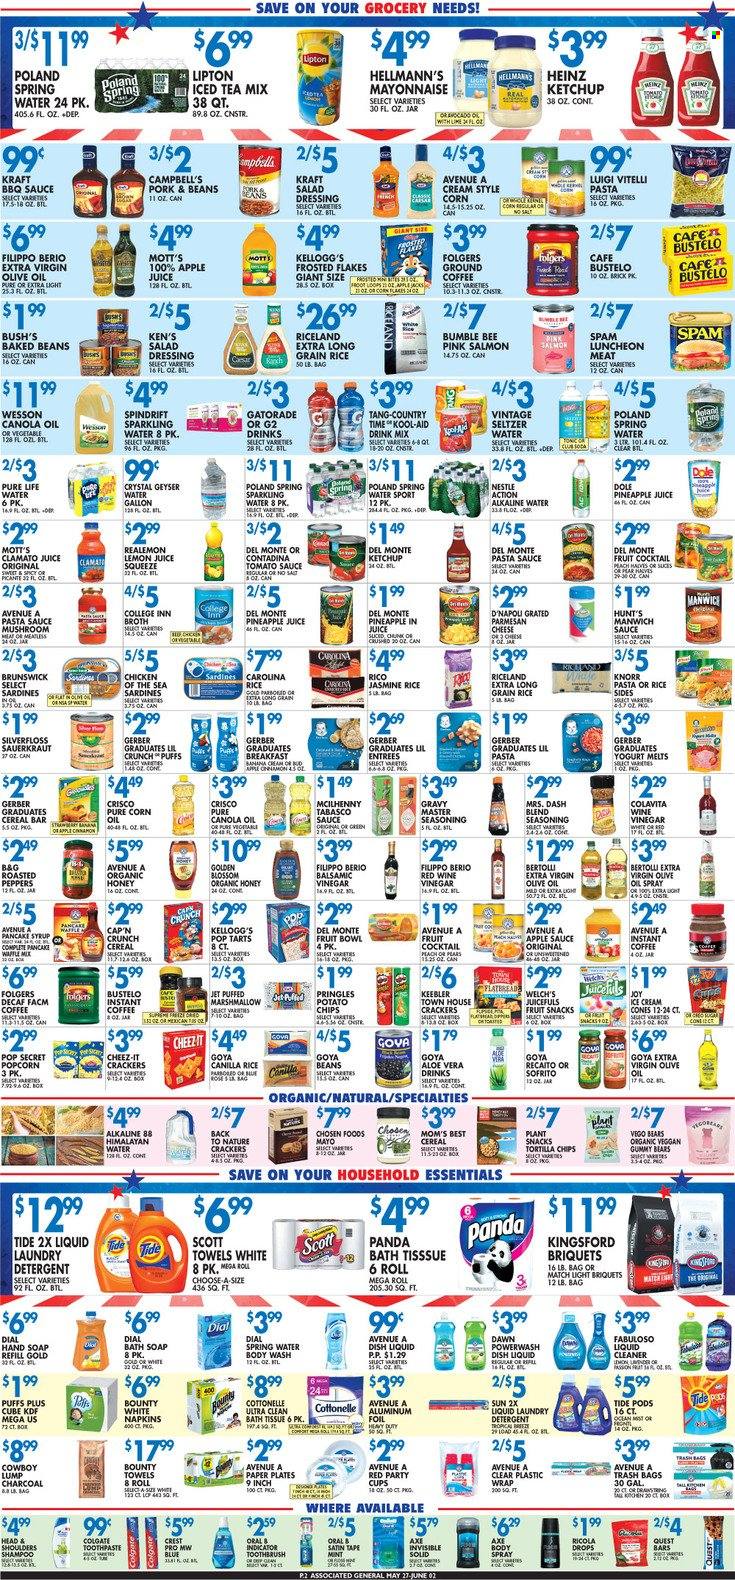 thumbnail - Associated Supermarkets Flyer - 05/27/2022 - 06/02/2022 - Sales products - mushrooms, puffs, Dole, peppers, pineapple, pears, Welch's, Mott's, salmon, sardines, Campbell's, pasta sauce, Bumble Bee, Knorr, sauce, Kraft®, Bertolli, Spam, lunch meat, parmesan, yoghurt, Blossom, mayonnaise, Hellmann’s, ice cream, marshmallows, Nestlé, ricola, Bounty, Mars, cereal bar, crackers, Kellogg's, Pop-Tarts, fruit snack, Keebler, Gerber, tortilla chips, potato chips, chips, popcorn, Cheez-It, Crisco, tabasco, broth, sauerkraut, tomato sauce, Heinz, baked beans, Goya, Manwich, cereals, corn flakes, Cap'n Crunch, Frosted Flakes, Mom's Best, rice, jasmine rice, long grain rice, spice, BBQ sauce, salad dressing, ketchup, dressing, balsamic vinegar, canola oil, extra virgin olive oil, wine vinegar, olive oil, apple sauce, honey, pancake syrup, syrup, apple juice, pineapple juice, Lipton, ice tea, tonic, Clamato, Country Time, Spindrift, Gatorade, seltzer water, spring water, sparkling water, alkaline water, lemon juice, instant coffee, Folgers, ground coffee, napkins, bath tissue, Cottonelle, Scott, detergent, cleaner, liquid cleaner, Fabuloso, Tide, laundry detergent, dishwashing liquid, Joy, Jet, body wash, shampoo, hand soap, Dial, soap, Colgate, toothbrush, toothpaste, Crest, Head & Shoulders, body spray, Axe, trash bags, bowl. Page 2.